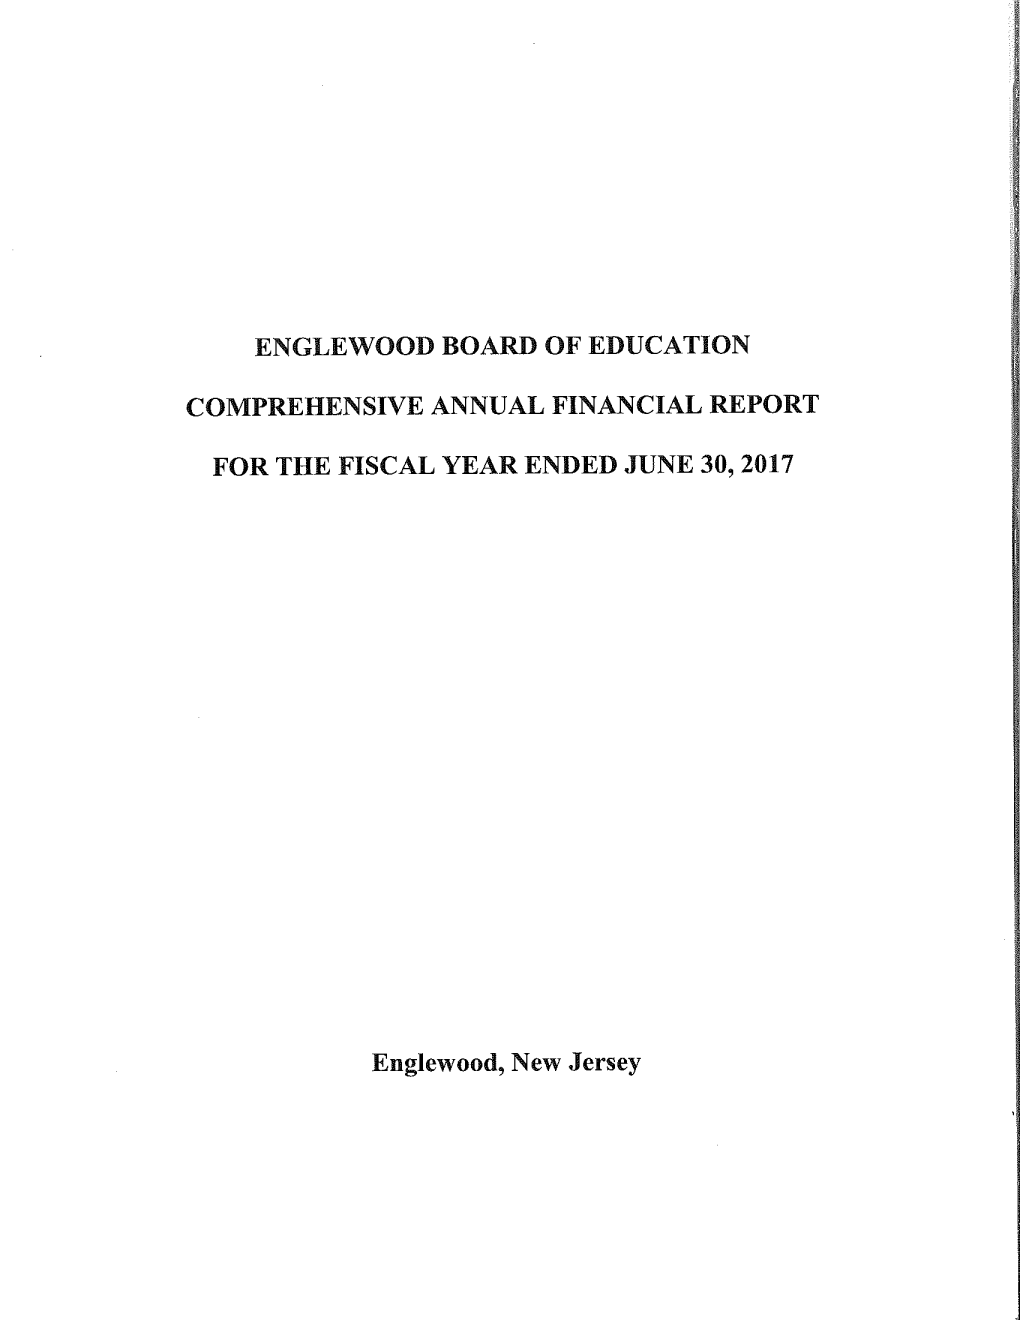 ENGLEWOOD BOARD of EDUCATION COMPREHENSIVE ANNUAL FINANCIAL REPORT for the FISCAL YEAR ENDED JUNE 30, 2017 Englewood, New Jersey